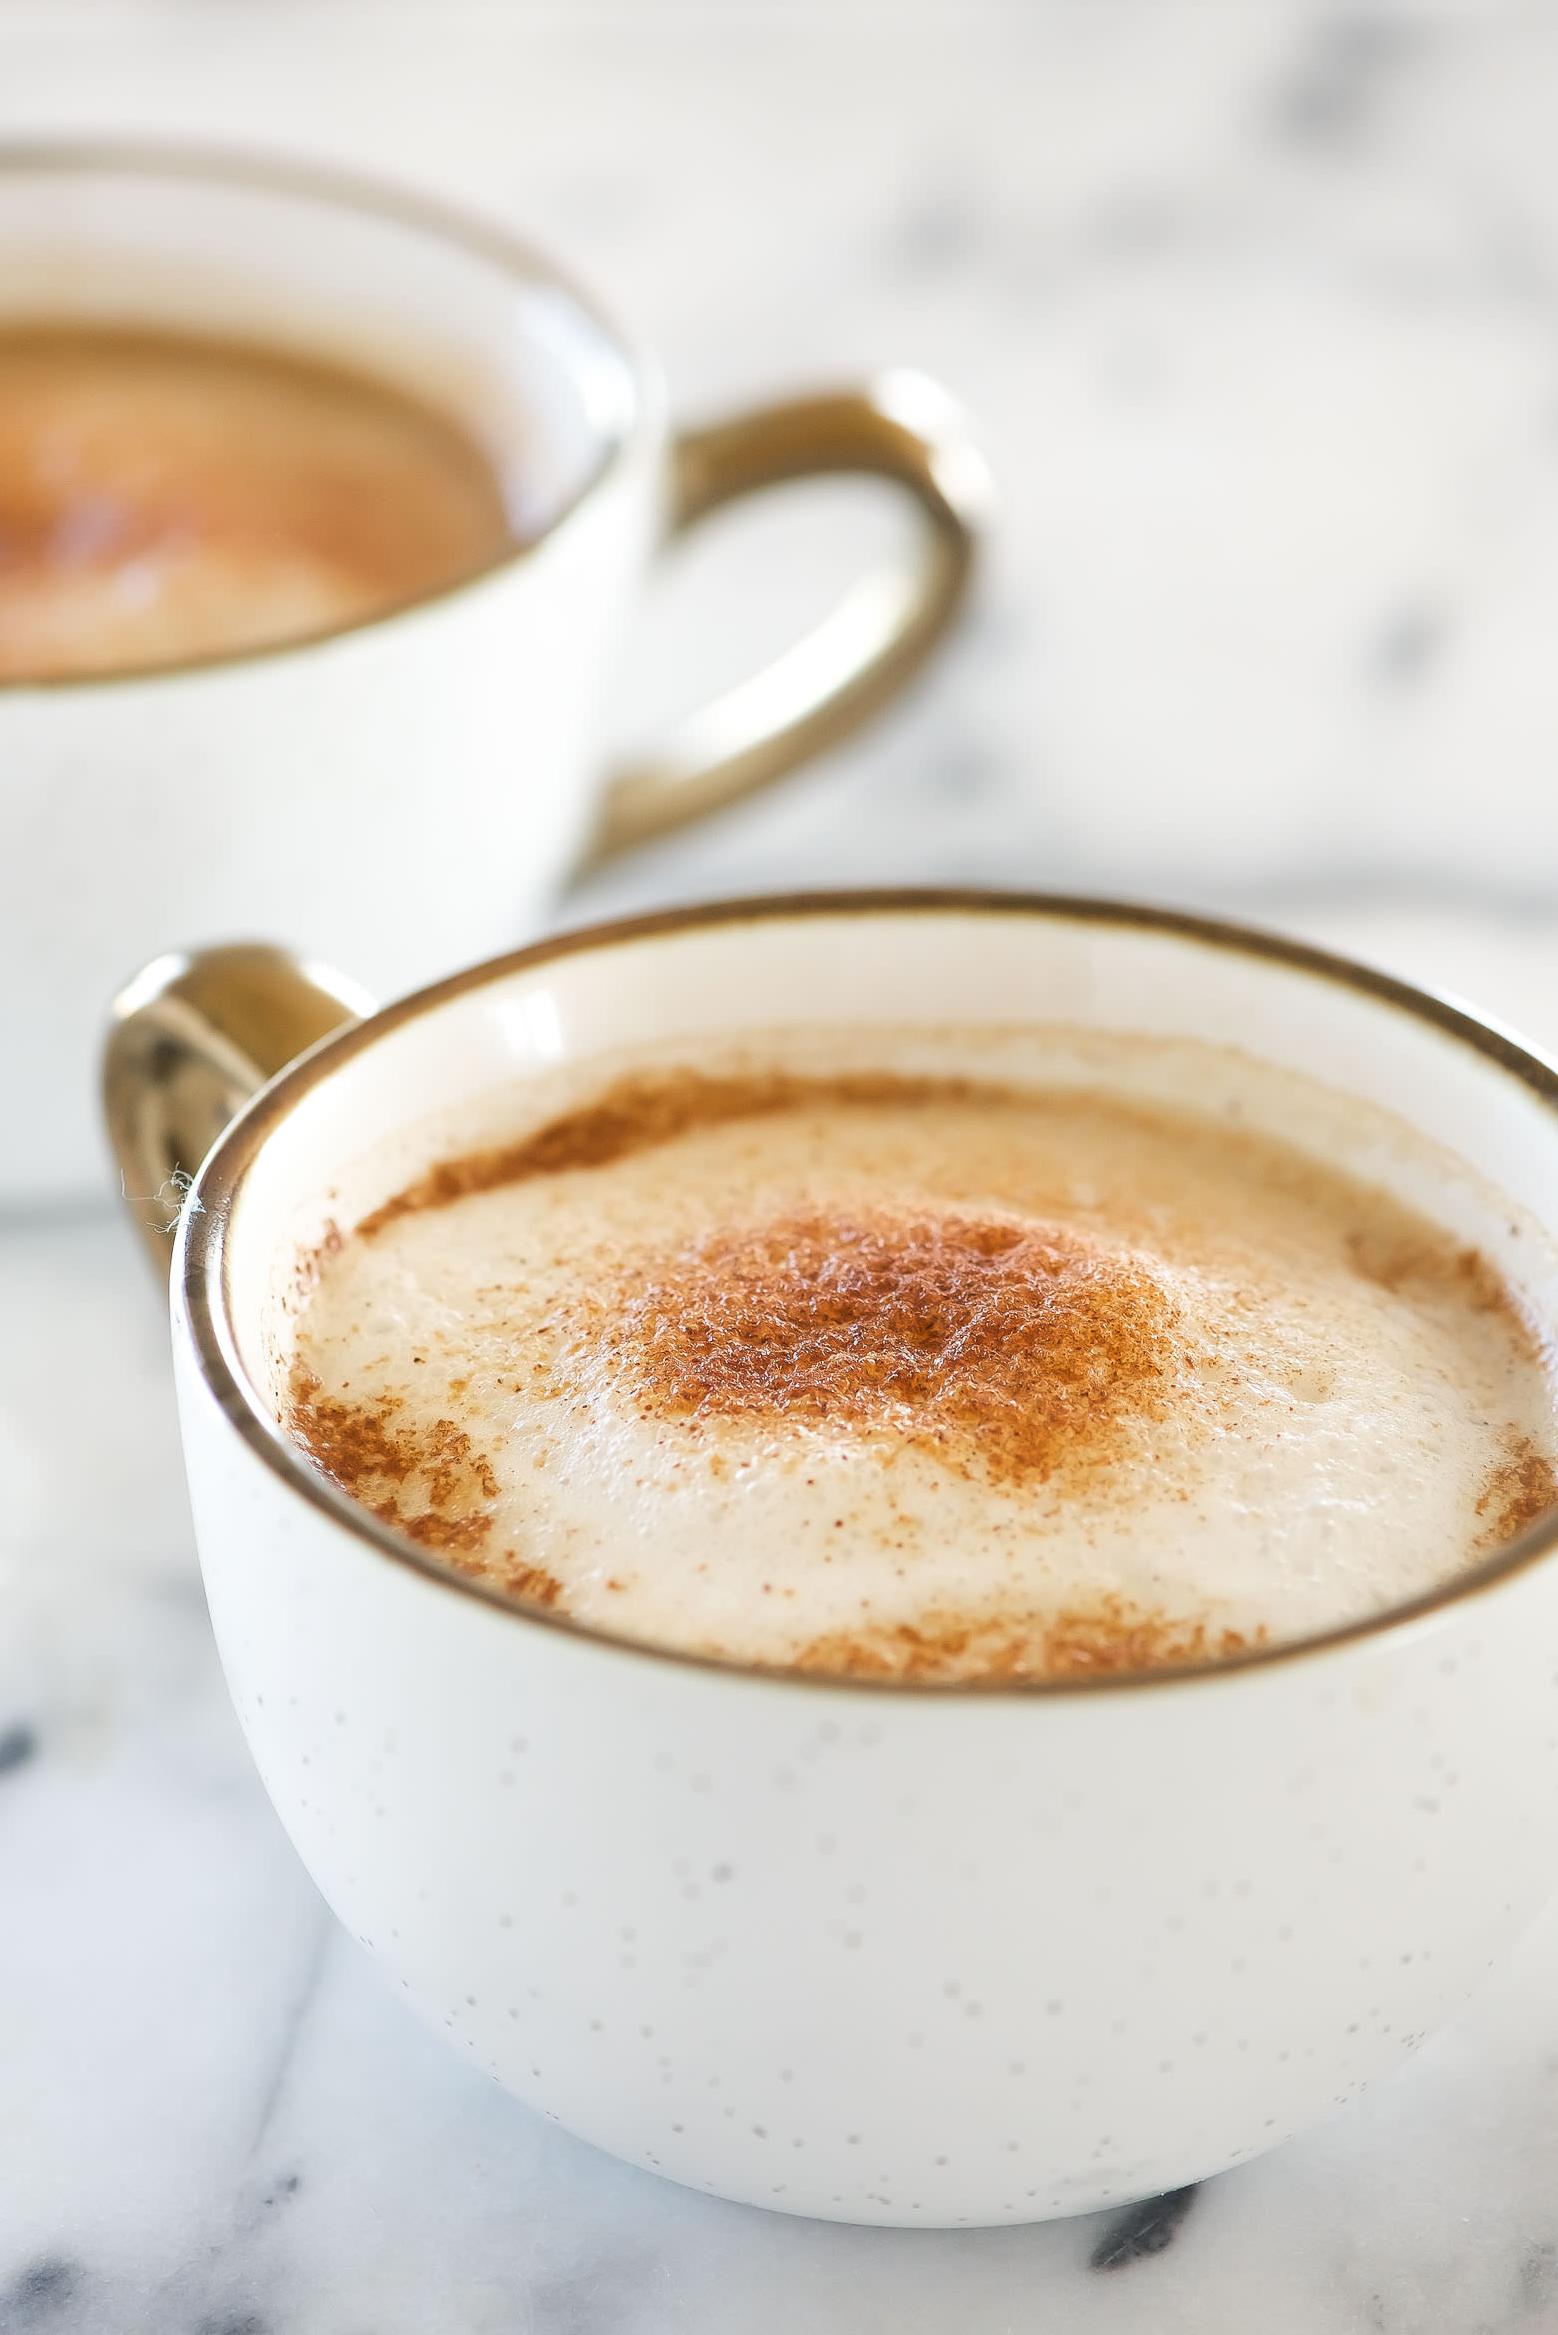  Don't wait for fall to indulge in this delicious cinnamon latte.